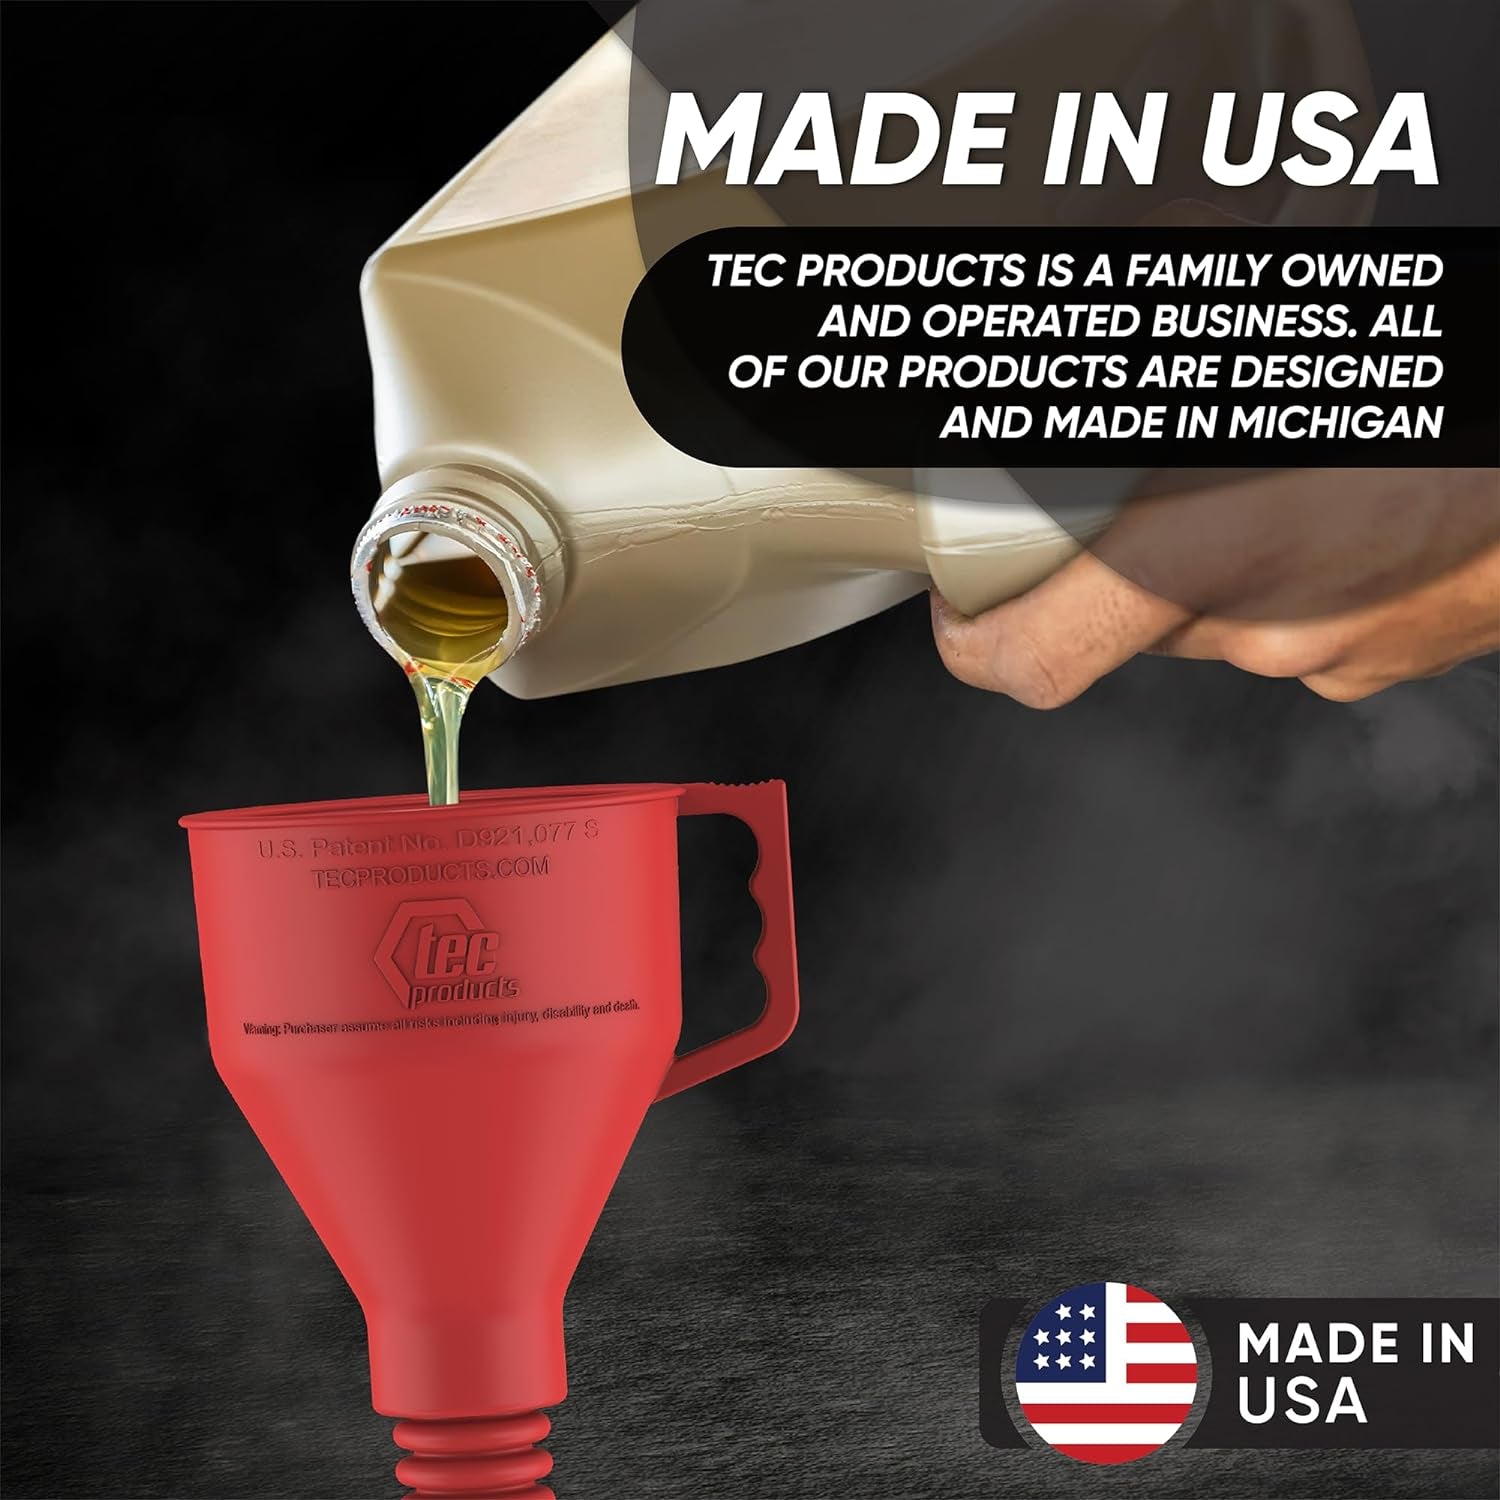 Flexall Funnel - Flexible Rubber Funnel with Handle, Multiple Sizes and Colors, Made in the USA